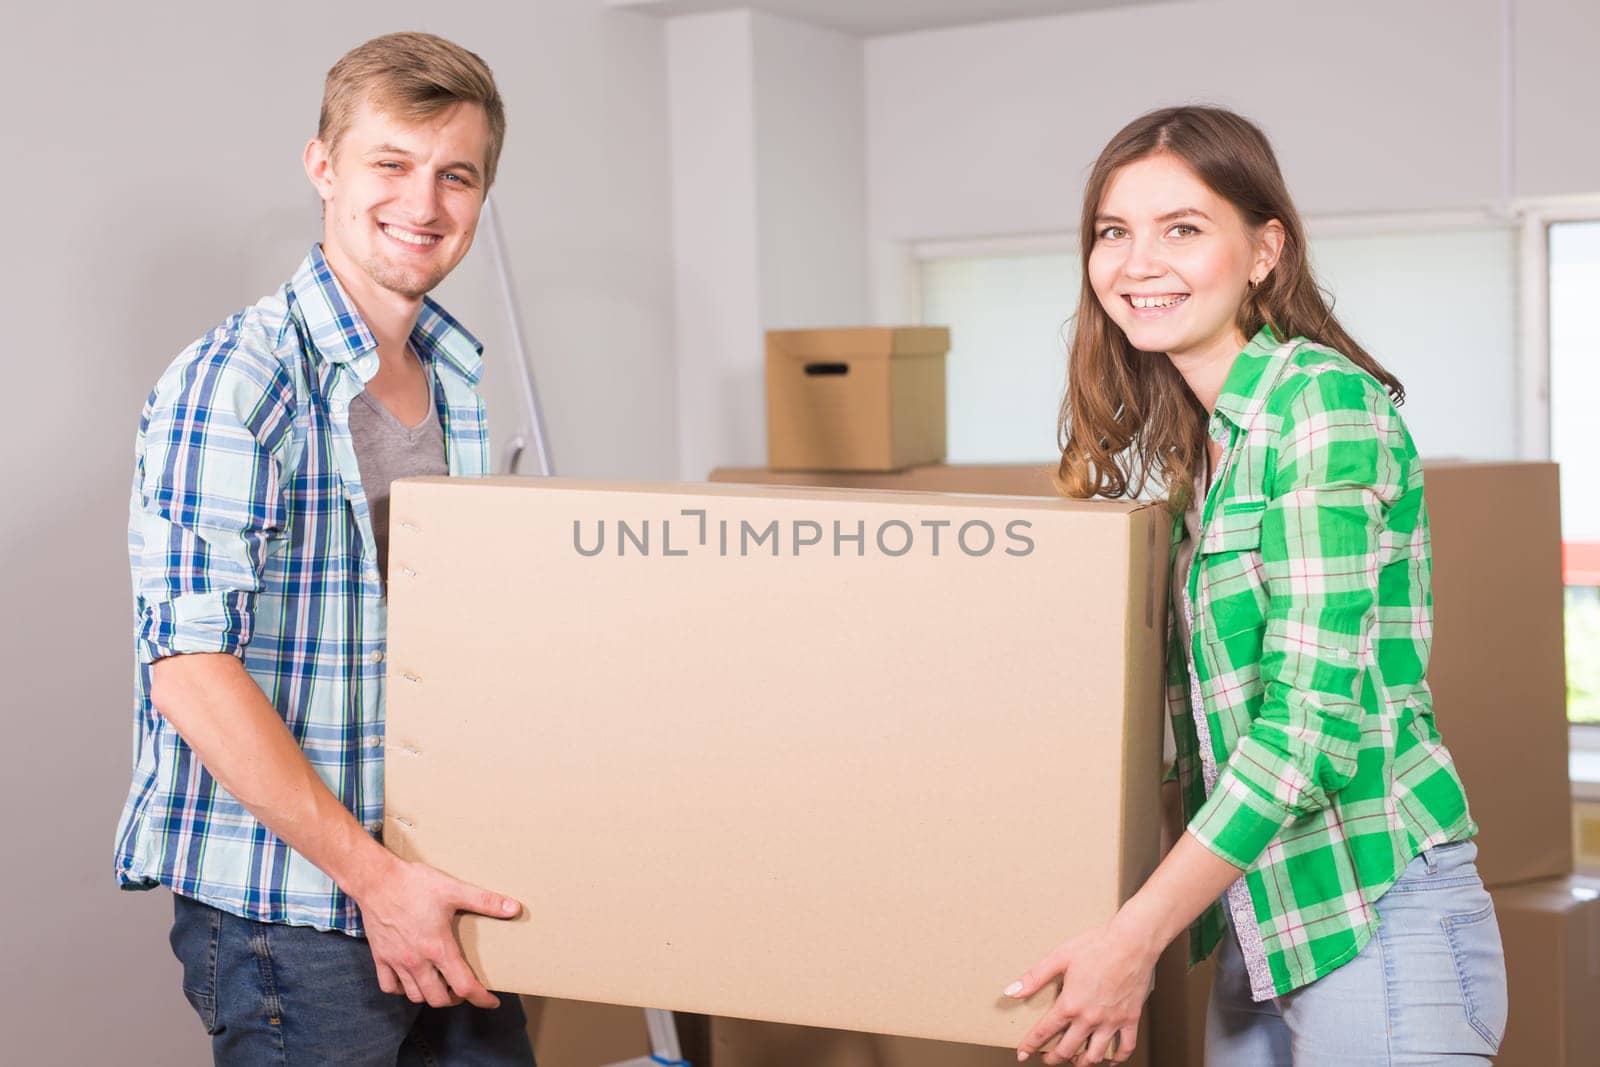 Happy young couple unpacking or packing boxes and moving into a new home. by Satura86